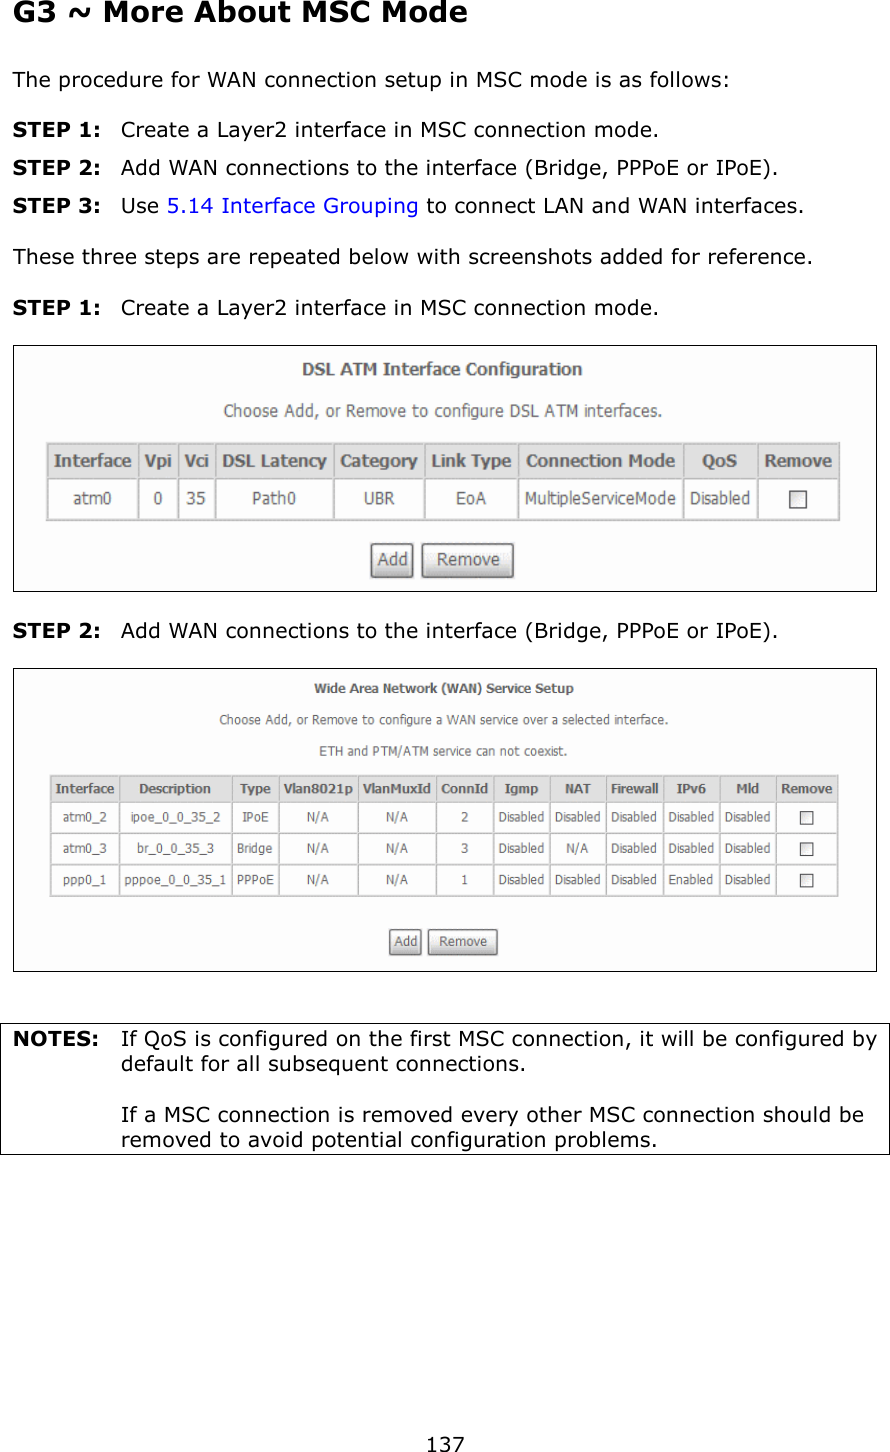   137 G3 ~ More About MSC Mode The procedure for WAN connection setup in MSC mode is as follows:  STEP 1:  Create a Layer2 interface in MSC connection mode. STEP 2:  Add WAN connections to the interface (Bridge, PPPoE or IPoE). STEP 3:  Use 5.14 Interface Grouping to connect LAN and WAN interfaces.  These three steps are repeated below with screenshots added for reference.  STEP 1:  Create a Layer2 interface in MSC connection mode.    STEP 2:  Add WAN connections to the interface (Bridge, PPPoE or IPoE).     NOTES:  If QoS is configured on the first MSC connection, it will be configured by default for all subsequent connections.          If a MSC connection is removed every other MSC connection should be removed to avoid potential configuration problems. 